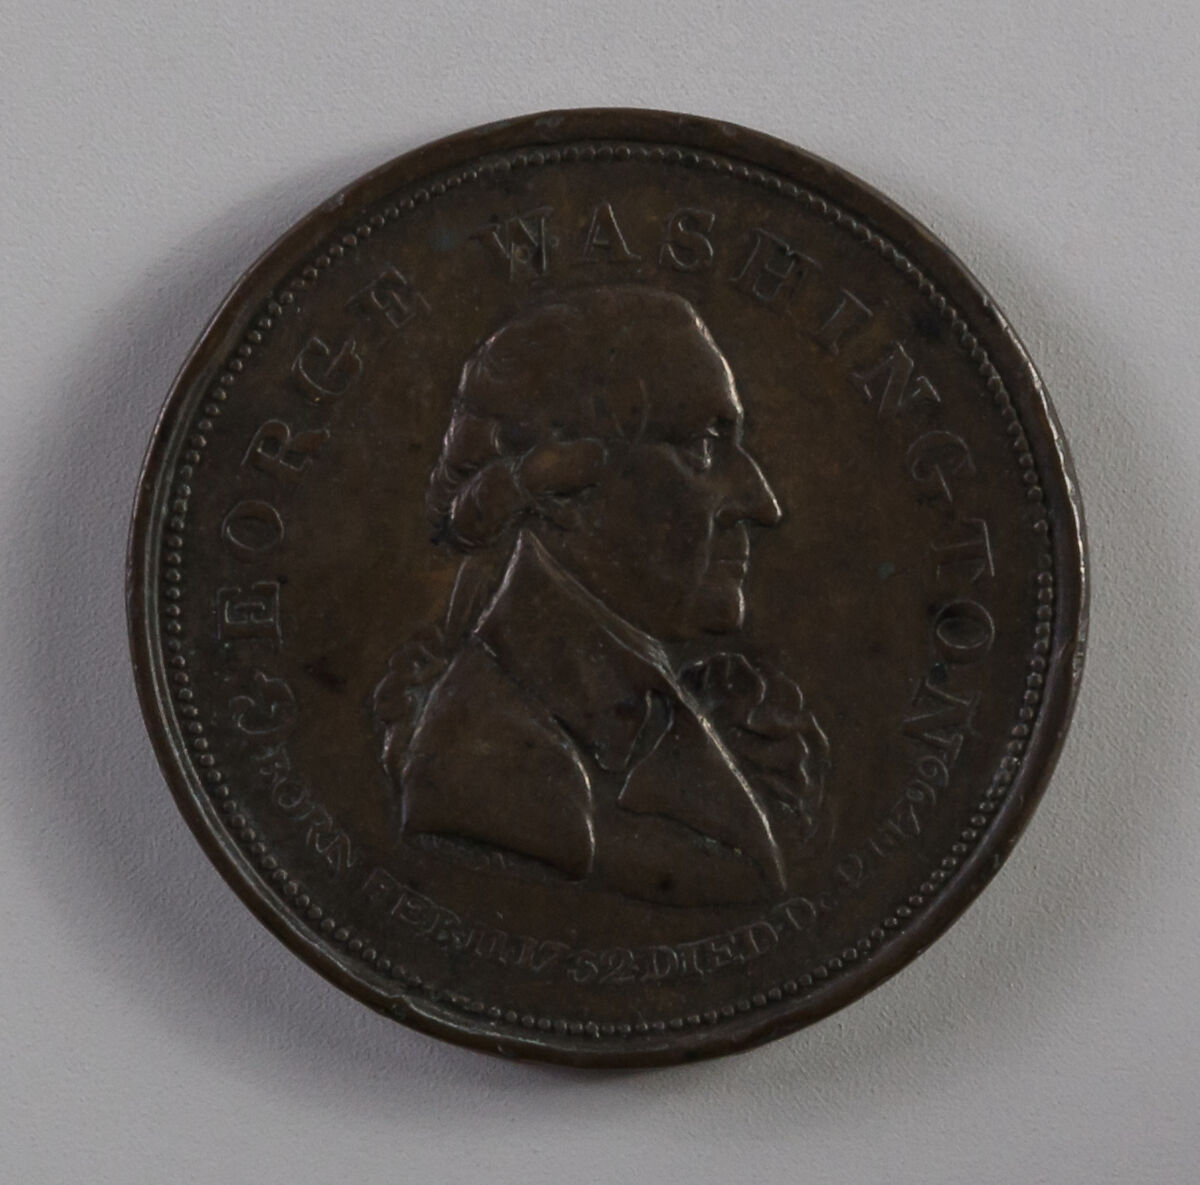 George Washington Commemorative Medal, Possibly Joseph S. and Alfred Wyon (active 18th–19th century), Bronze 